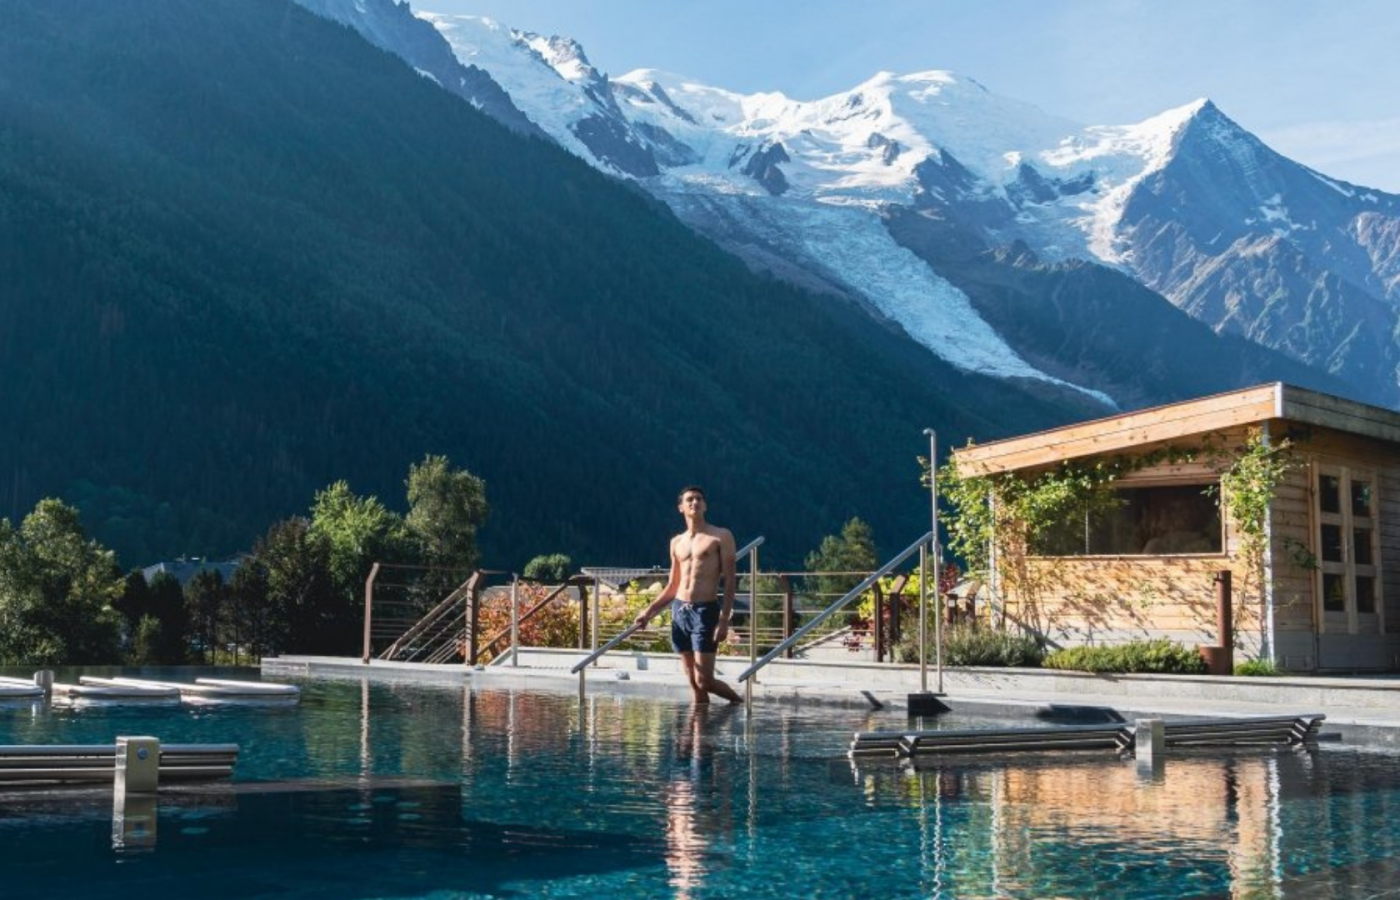 The QC Terme wellness spa has arrived in Chamonix in the wonderful setting of the Mont Blanc Valley